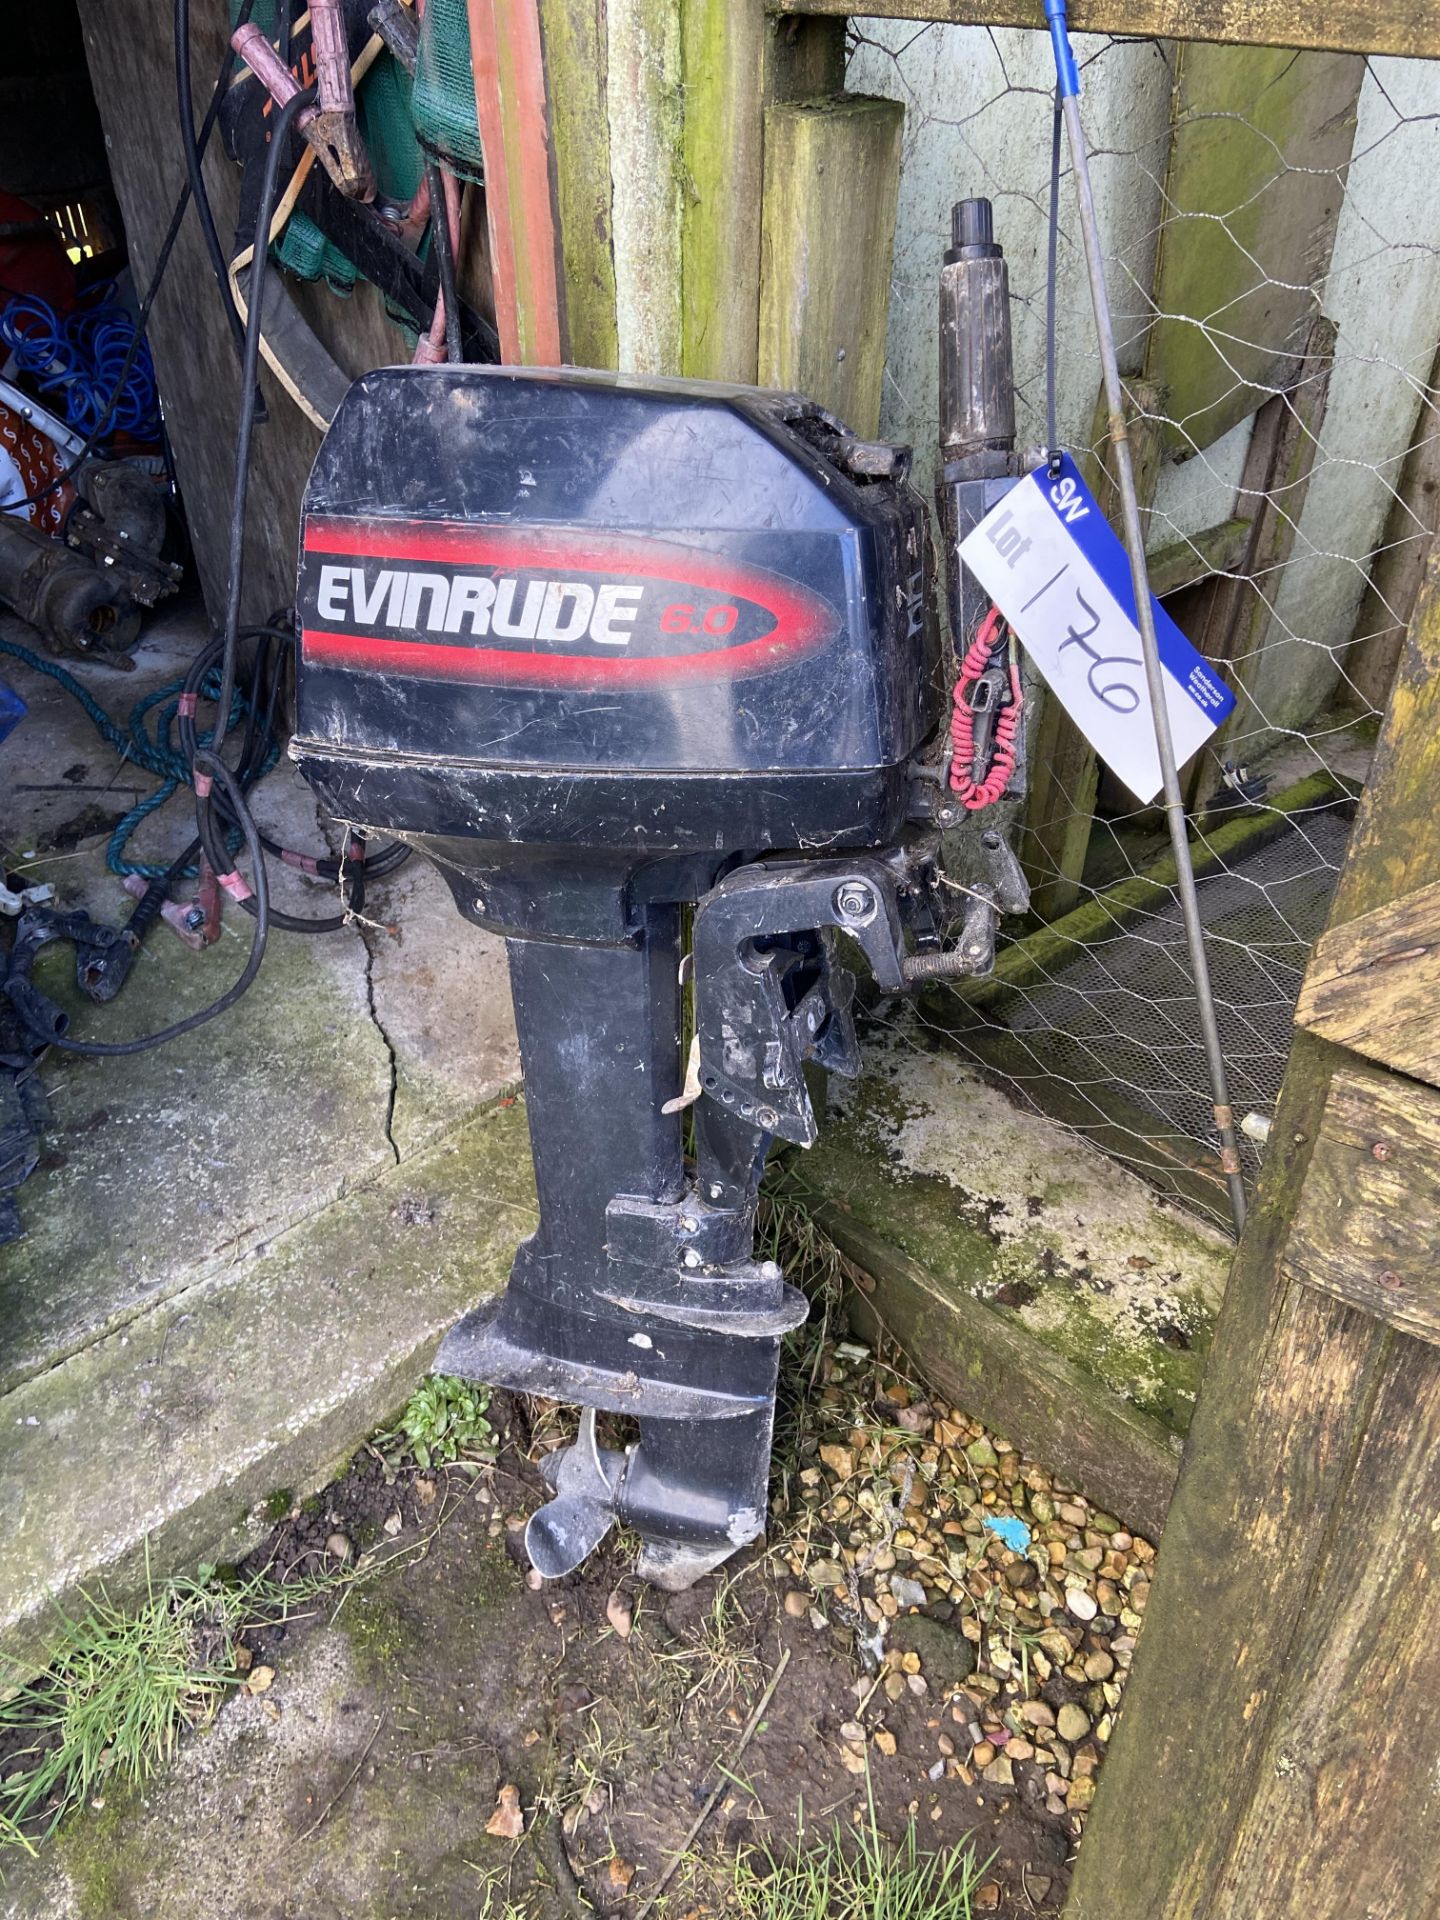 Evinrude 6.0 Outboard Engine Please read the following important notes:- Free loading will be